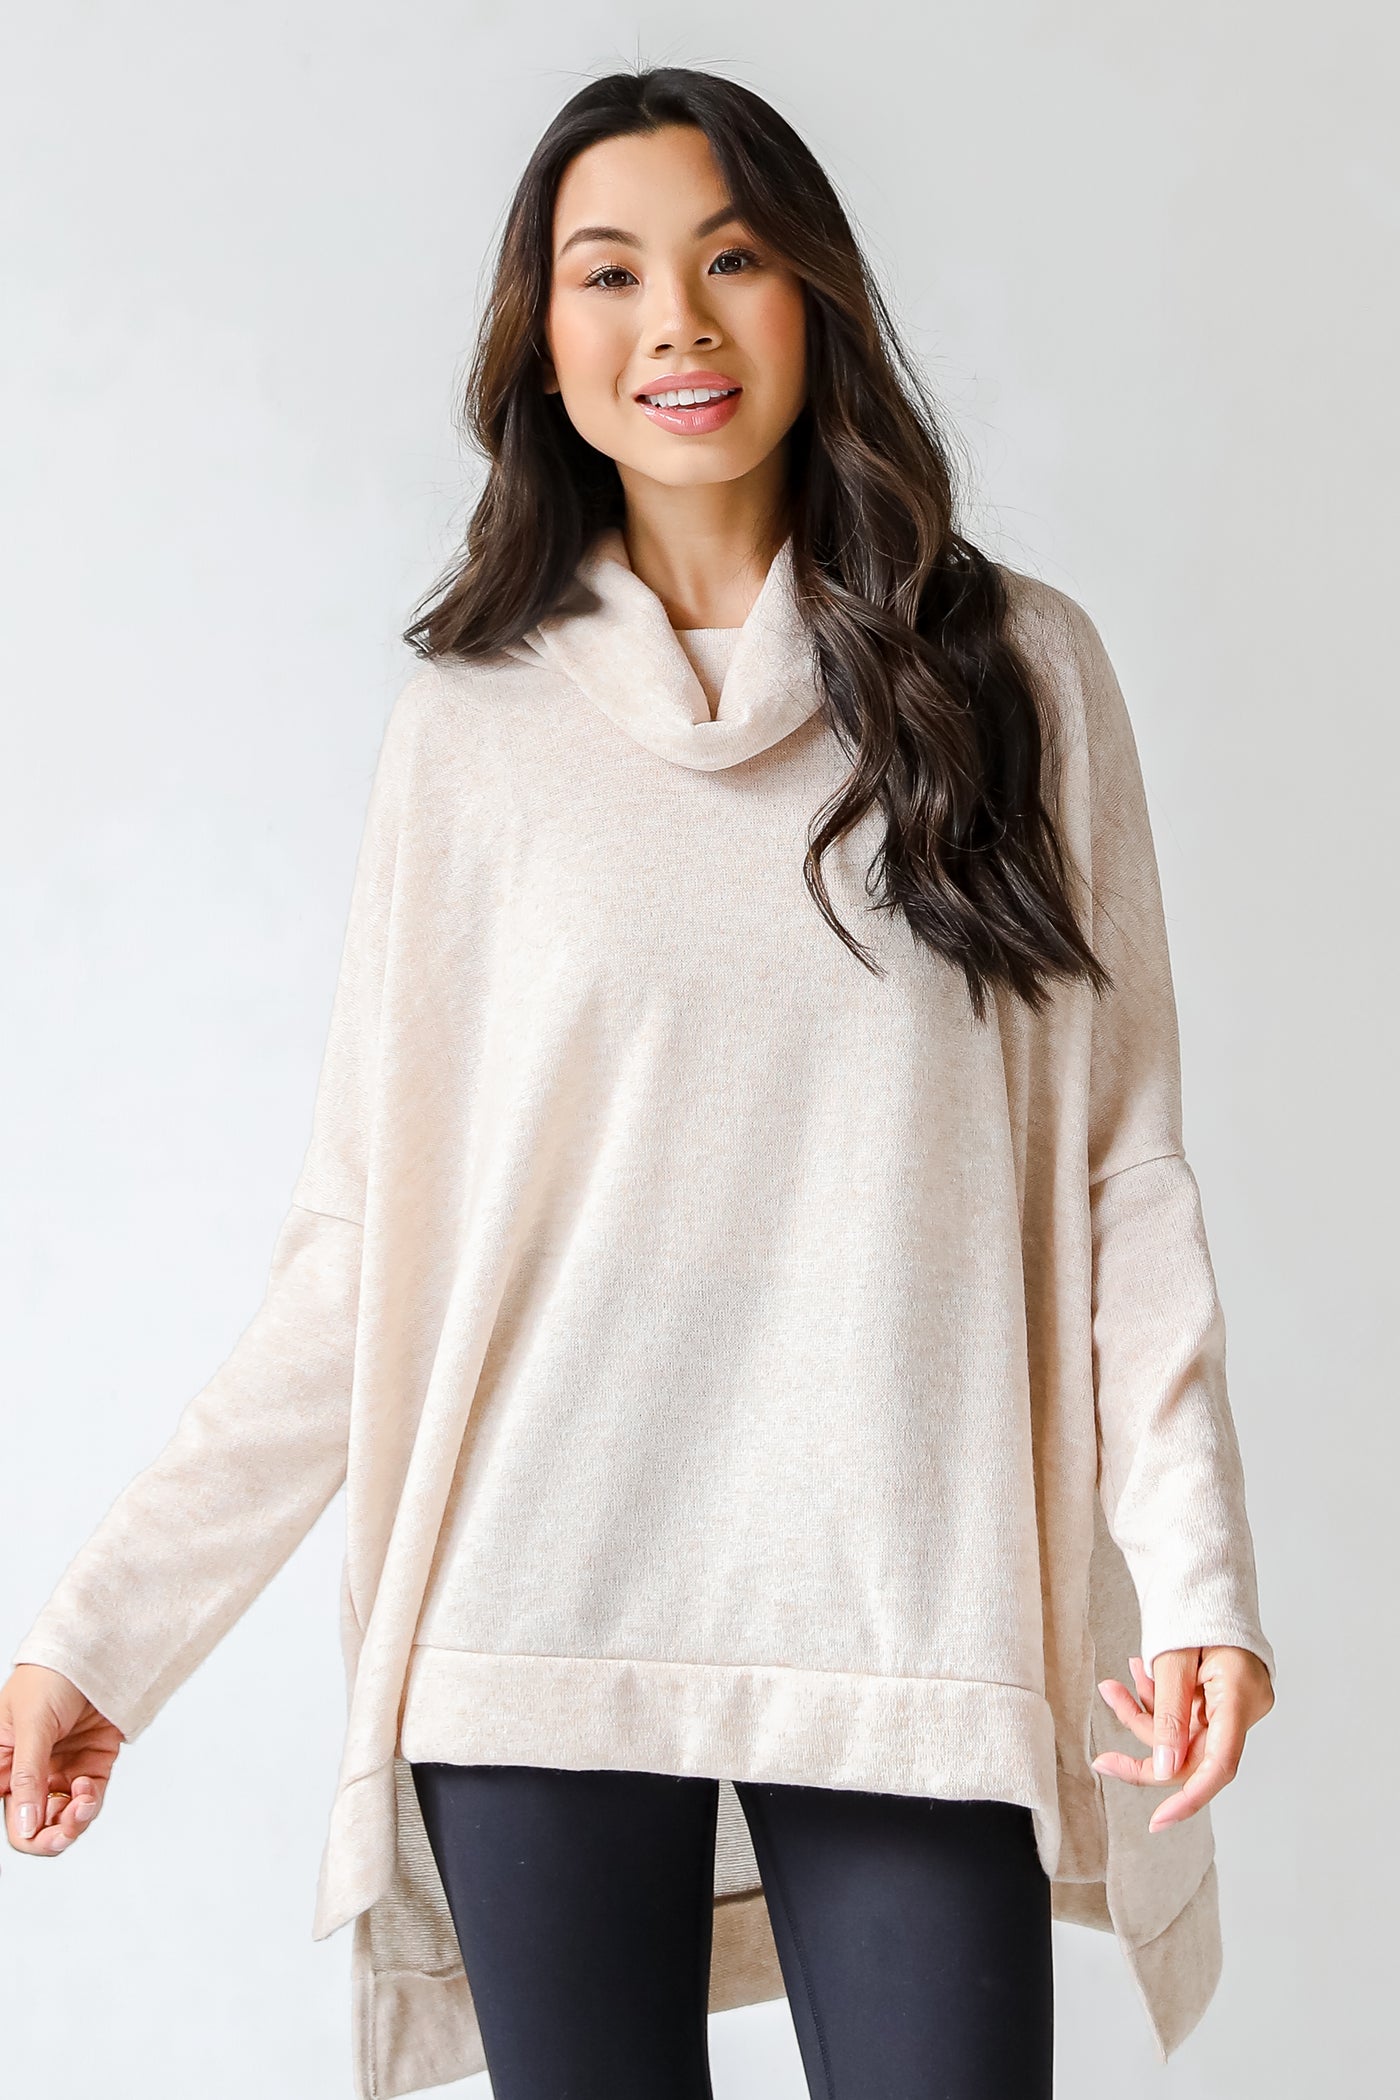 Cowl Neck Knit Top in oatmeal